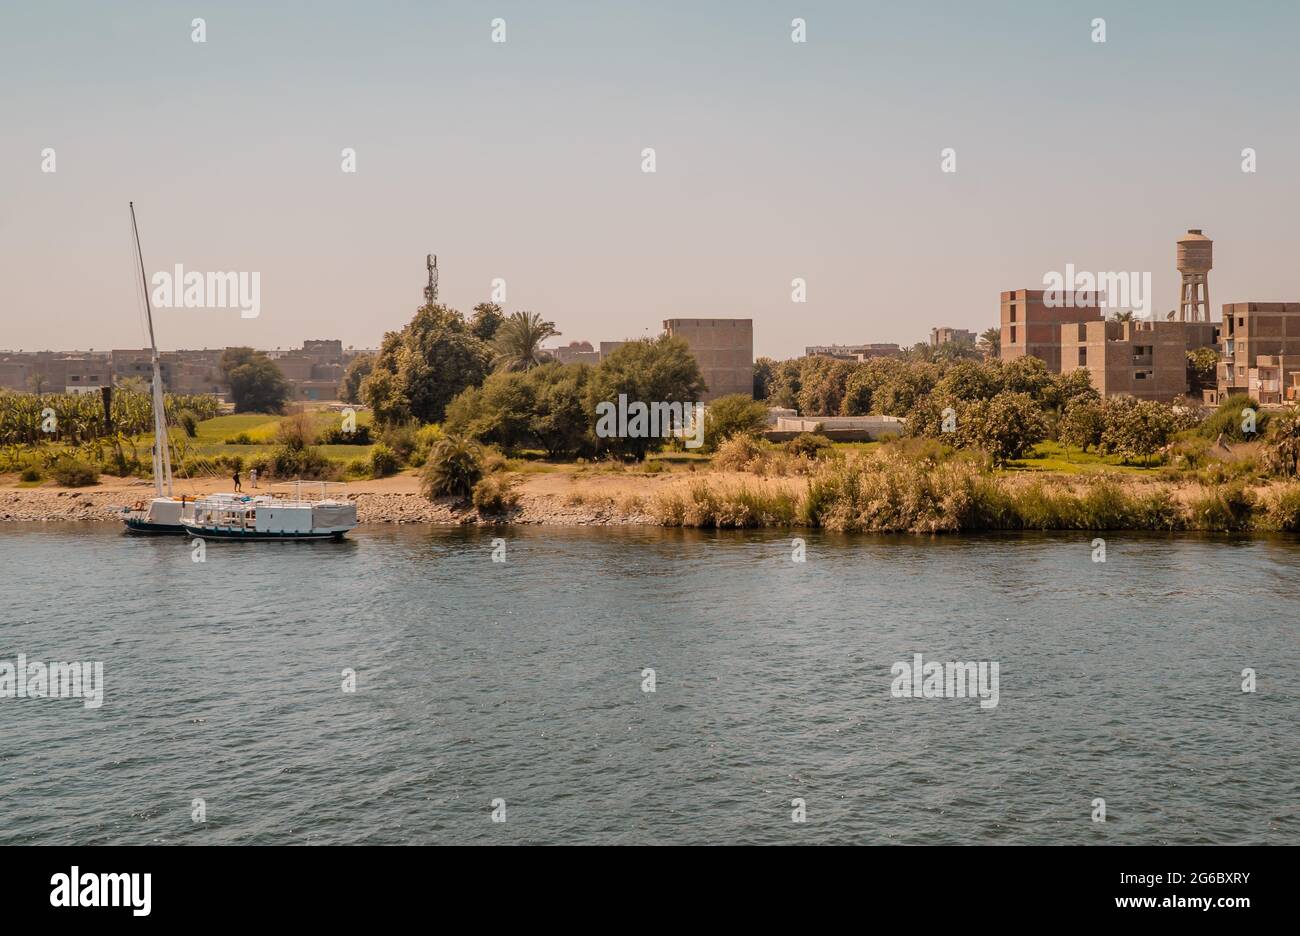 Panoramic view of houses in a traditional village at sunset on the Nile River near Edfu, Egypt Stock Photo